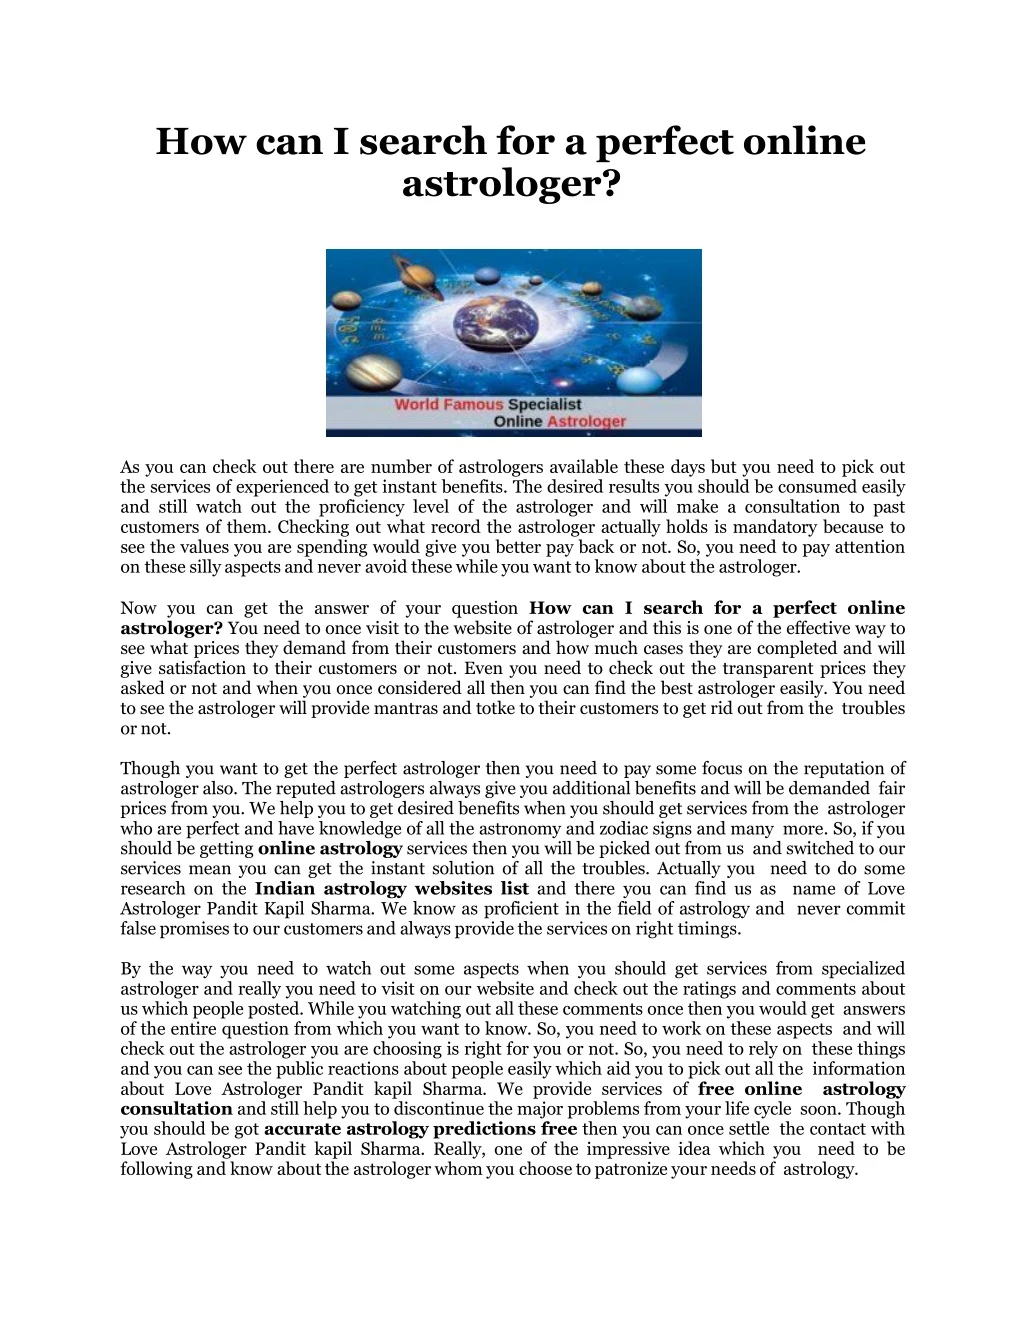 how can i search for a perfect online astrologer